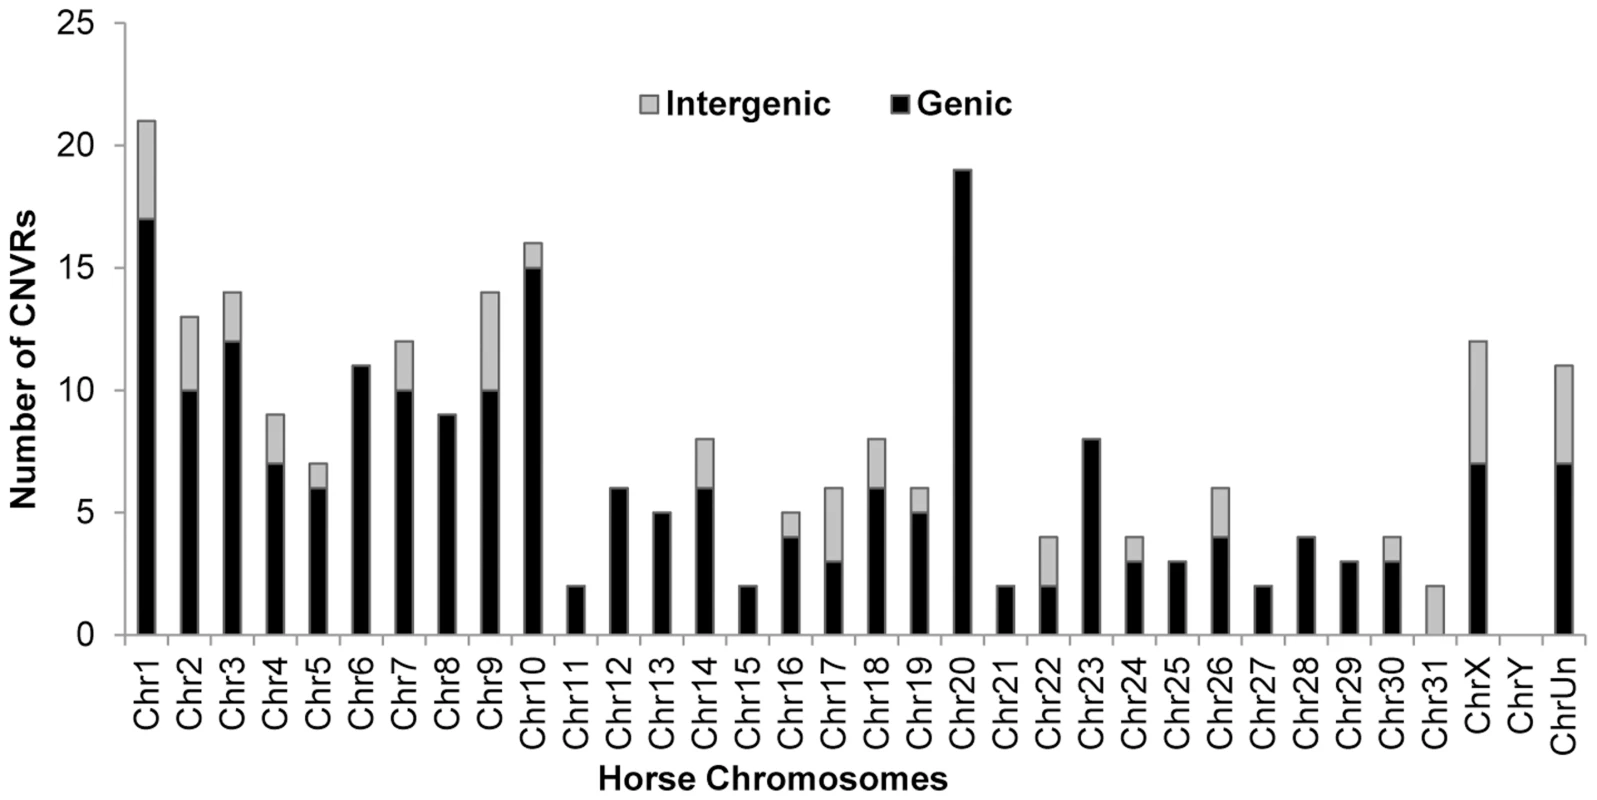 Chromosome-wise distribution of genic and intergenic CNVRs in the horse genome.